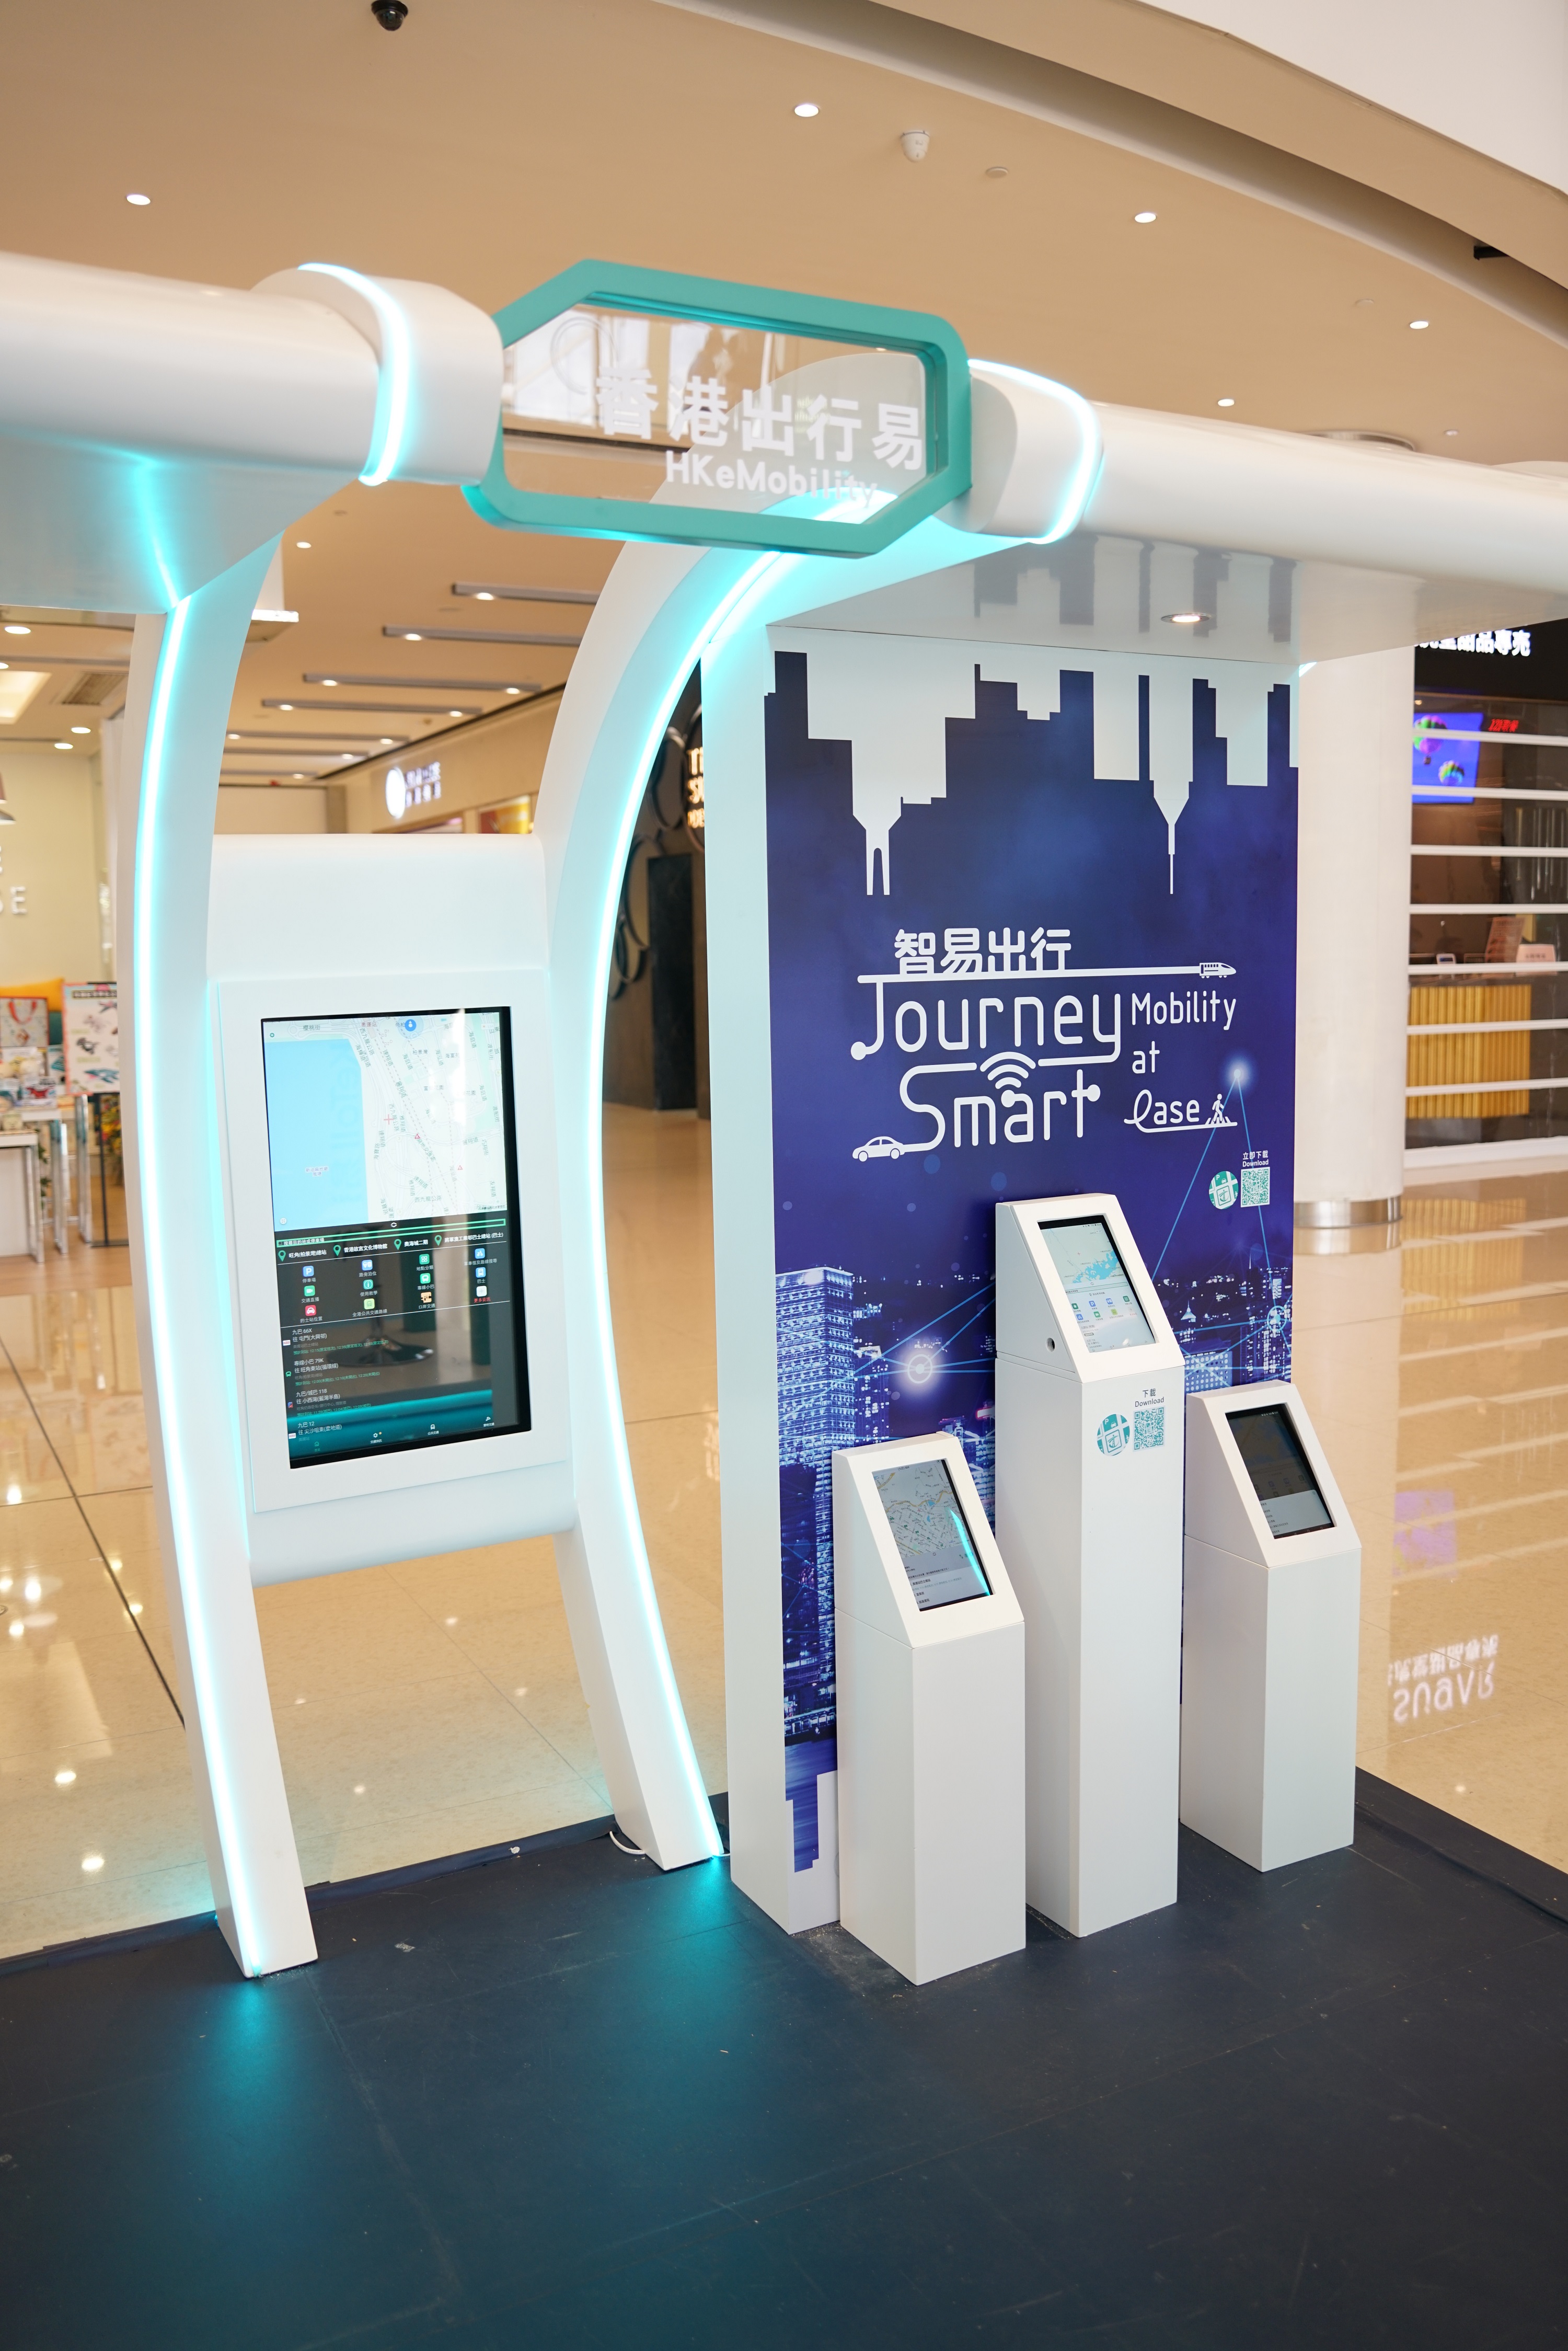 The Transport Department (TD) holds "Journey Smart" roving exhibition from today (July 23) until October. The exhibition showcases the TD's "HKeMobility" mobile application.